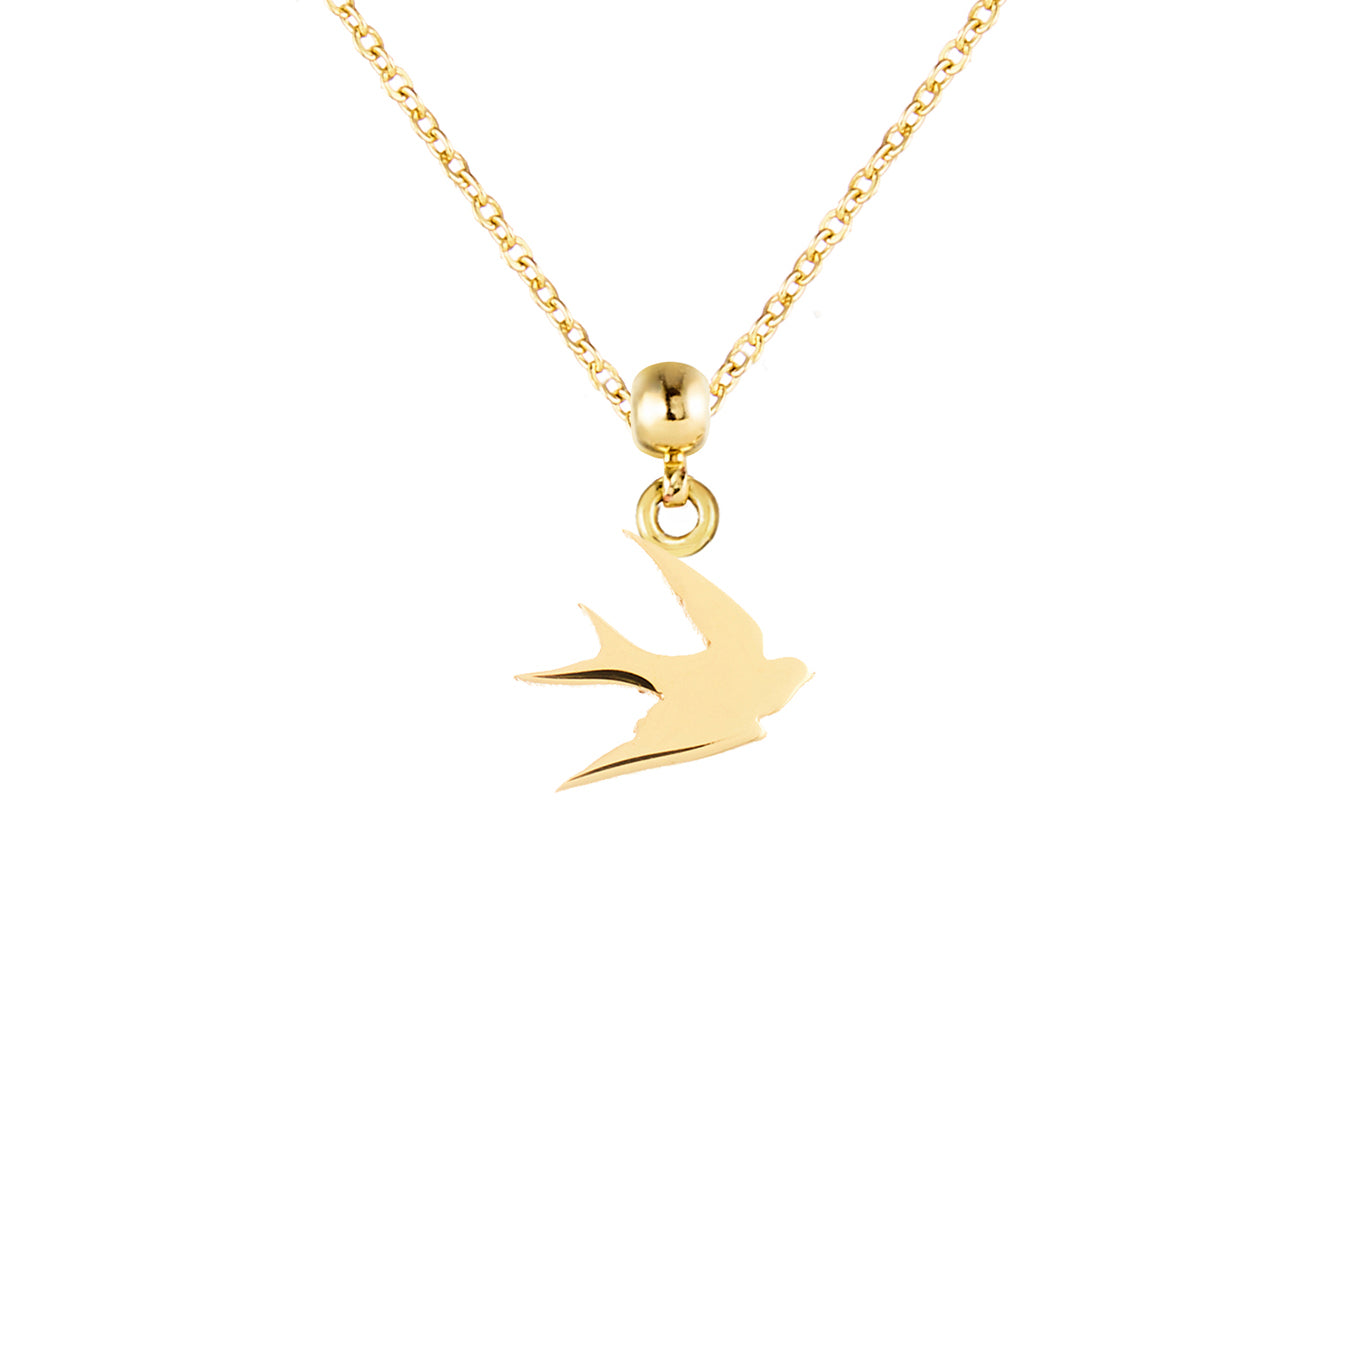 Swallow Gold Plated Charm